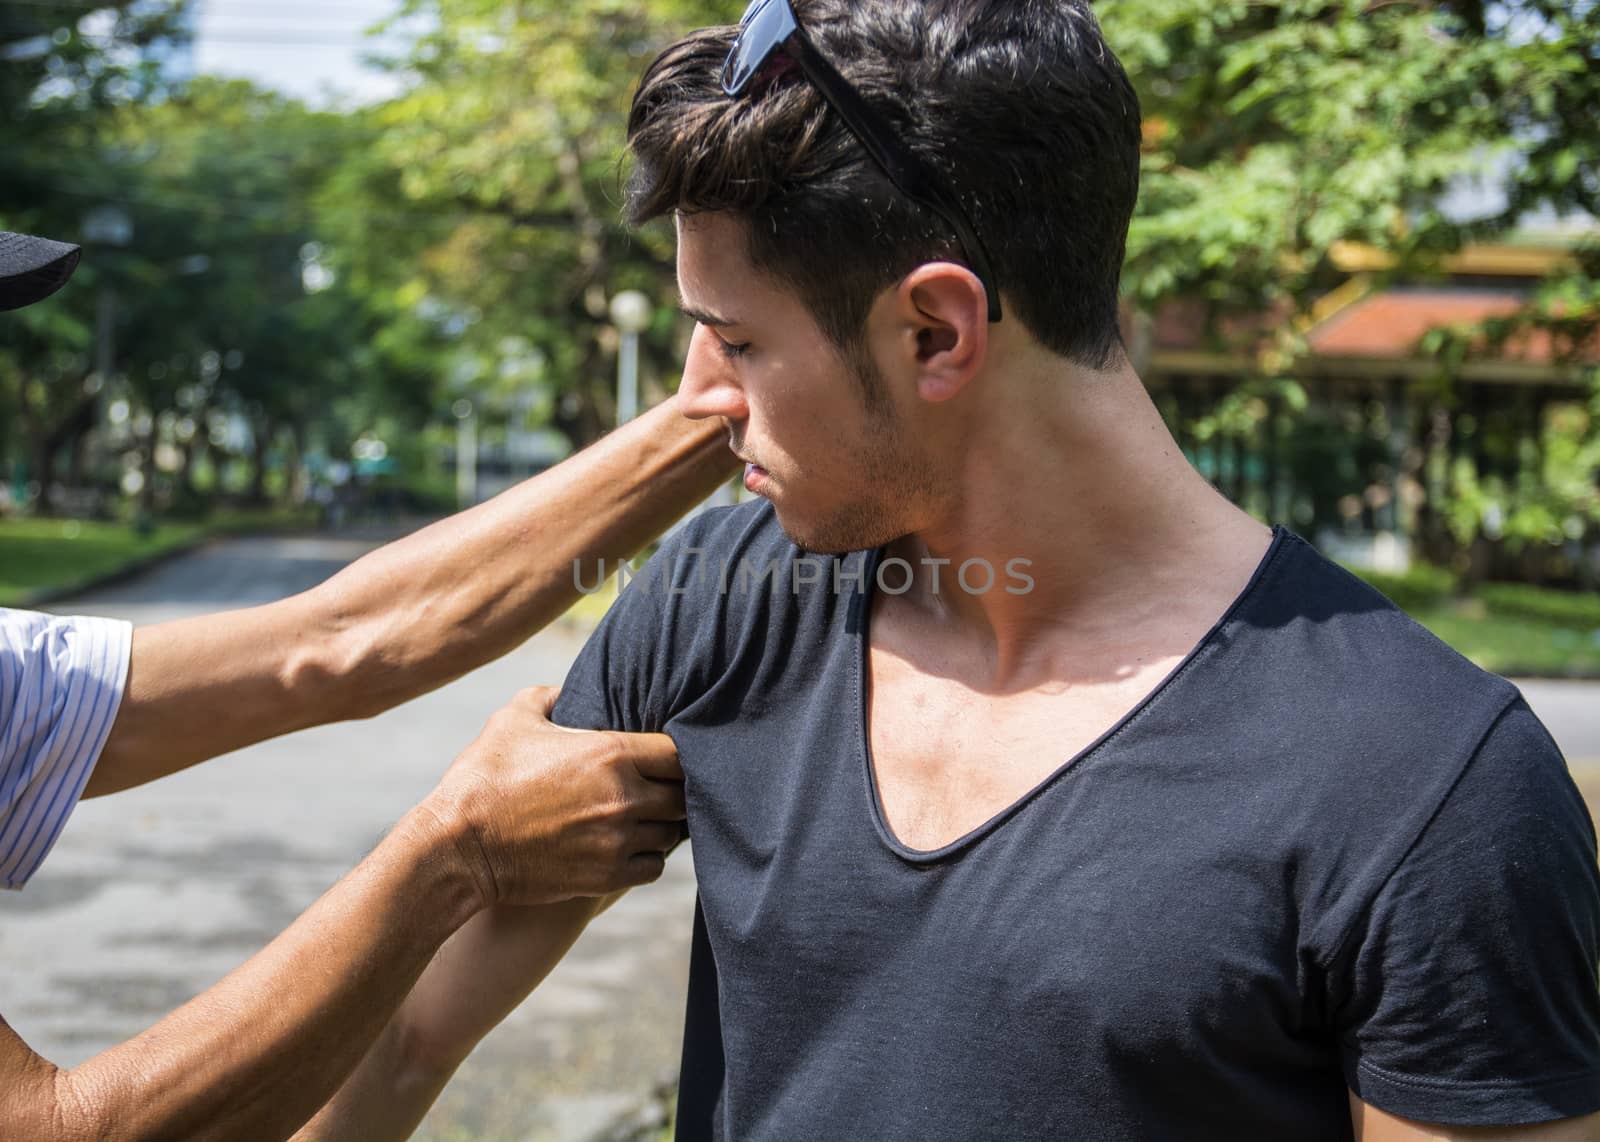 Young man standing and receiving hand massage. Horizontal outdoors shot